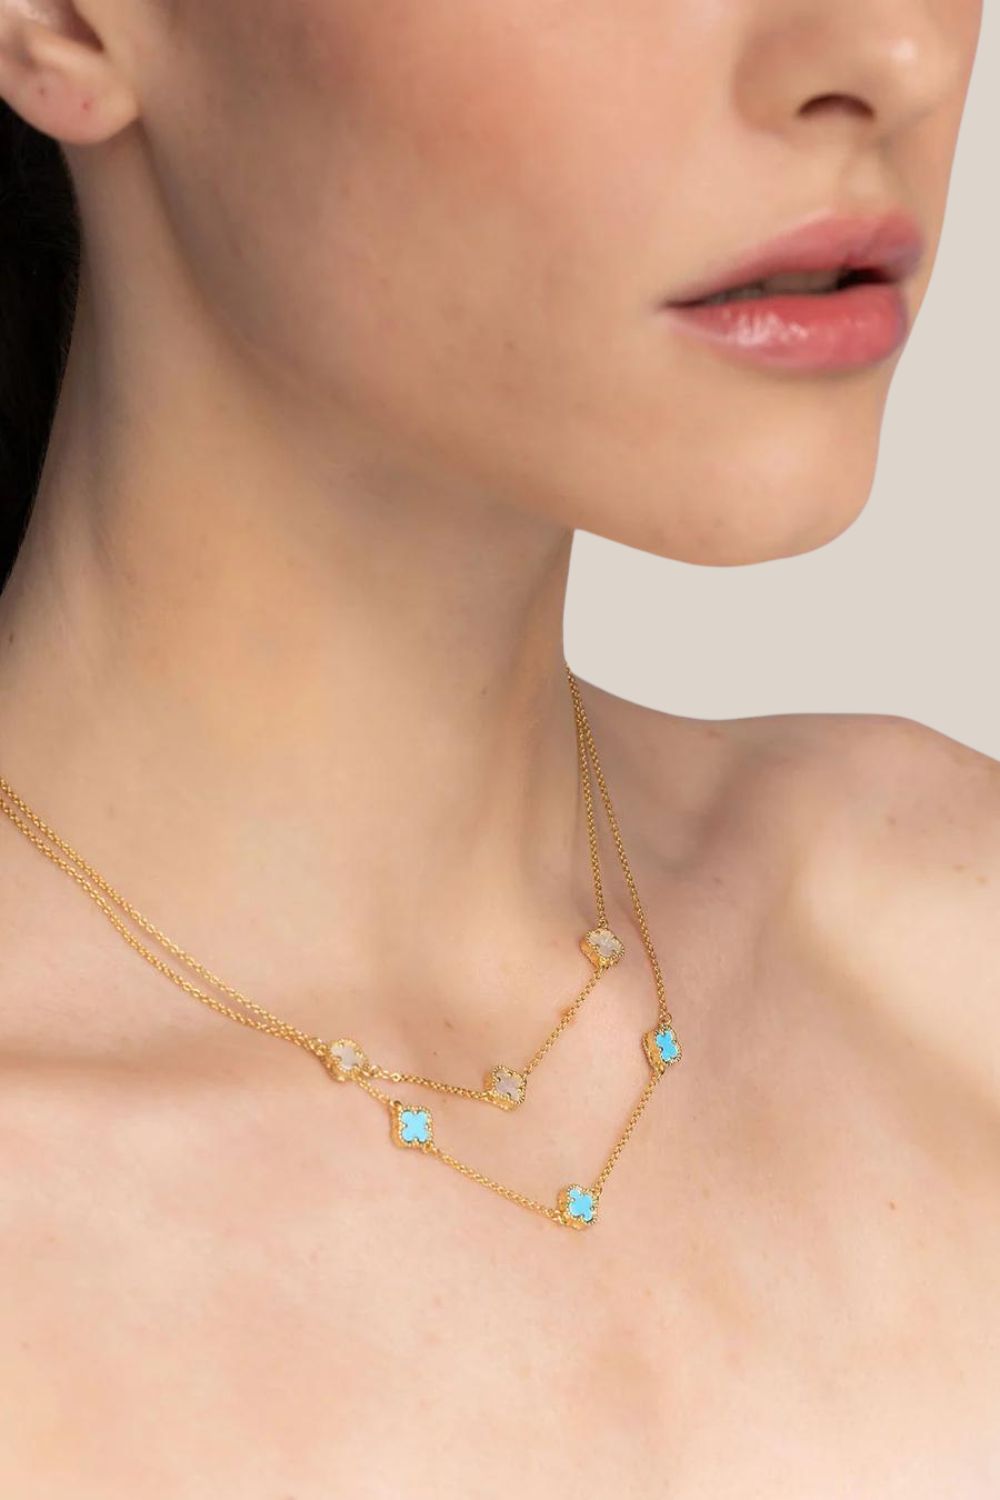 Liberte Duchess Gold Mother of Pearl Necklace